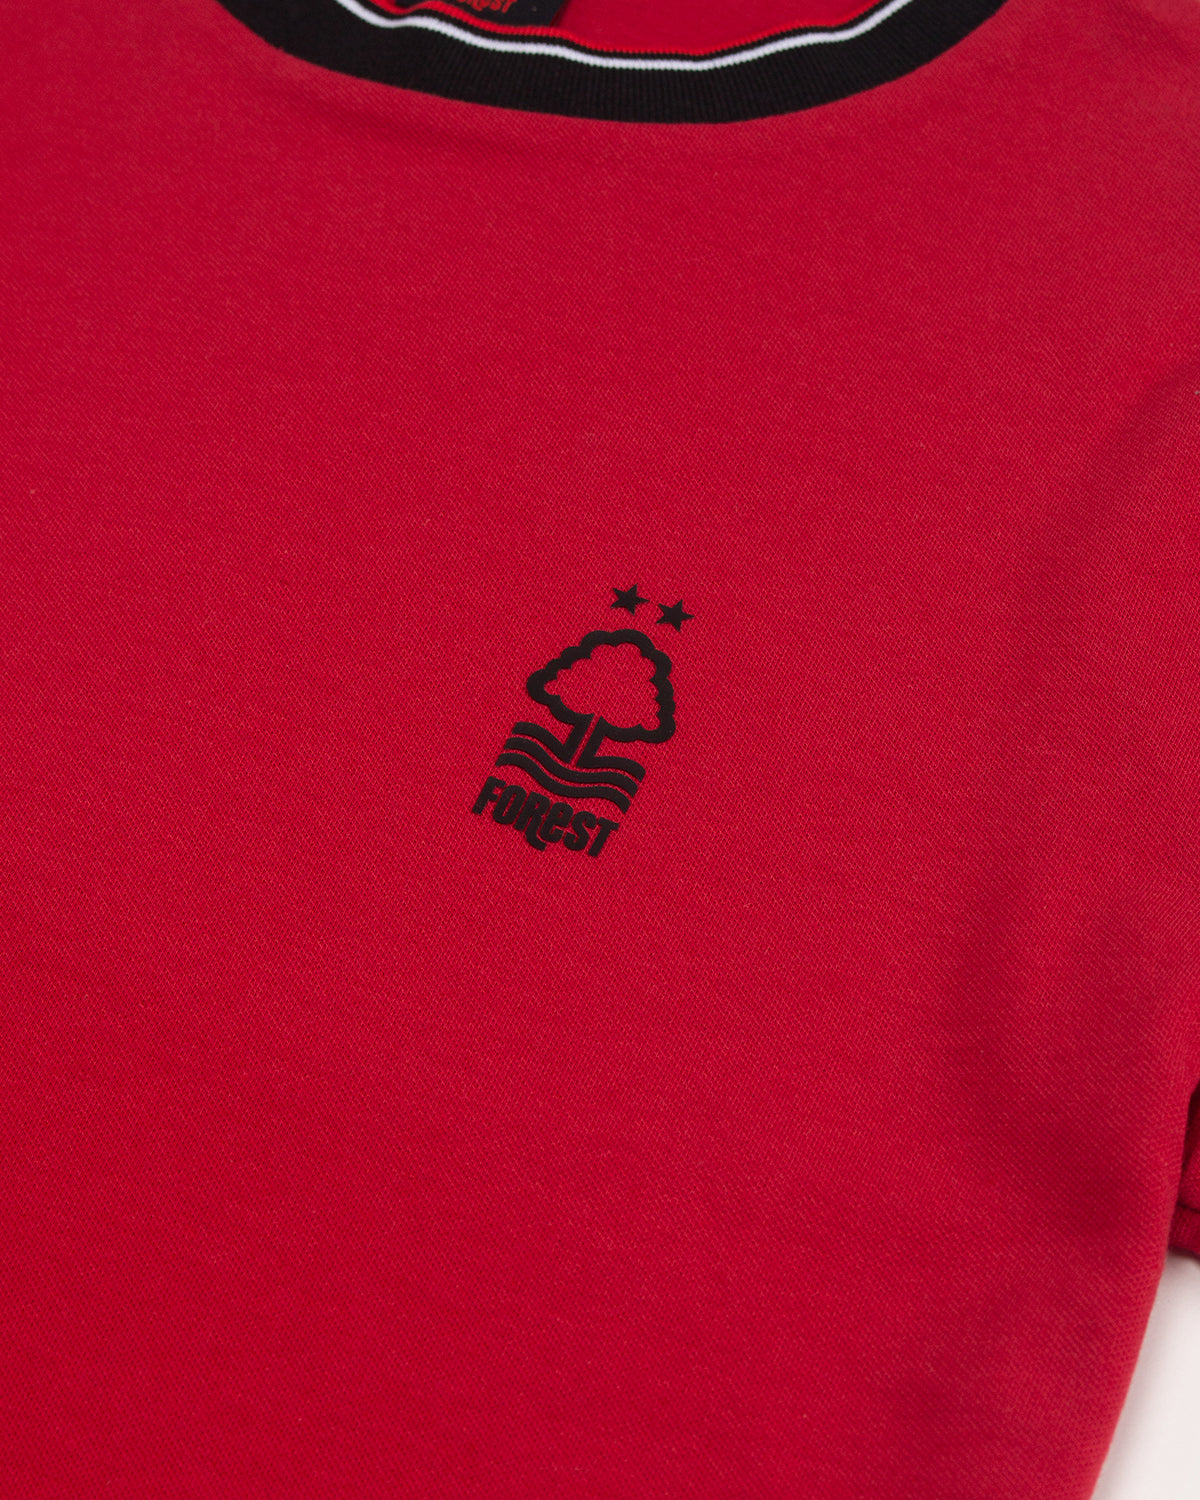 NFFC Womens Red Essential Ringer T-Shirt